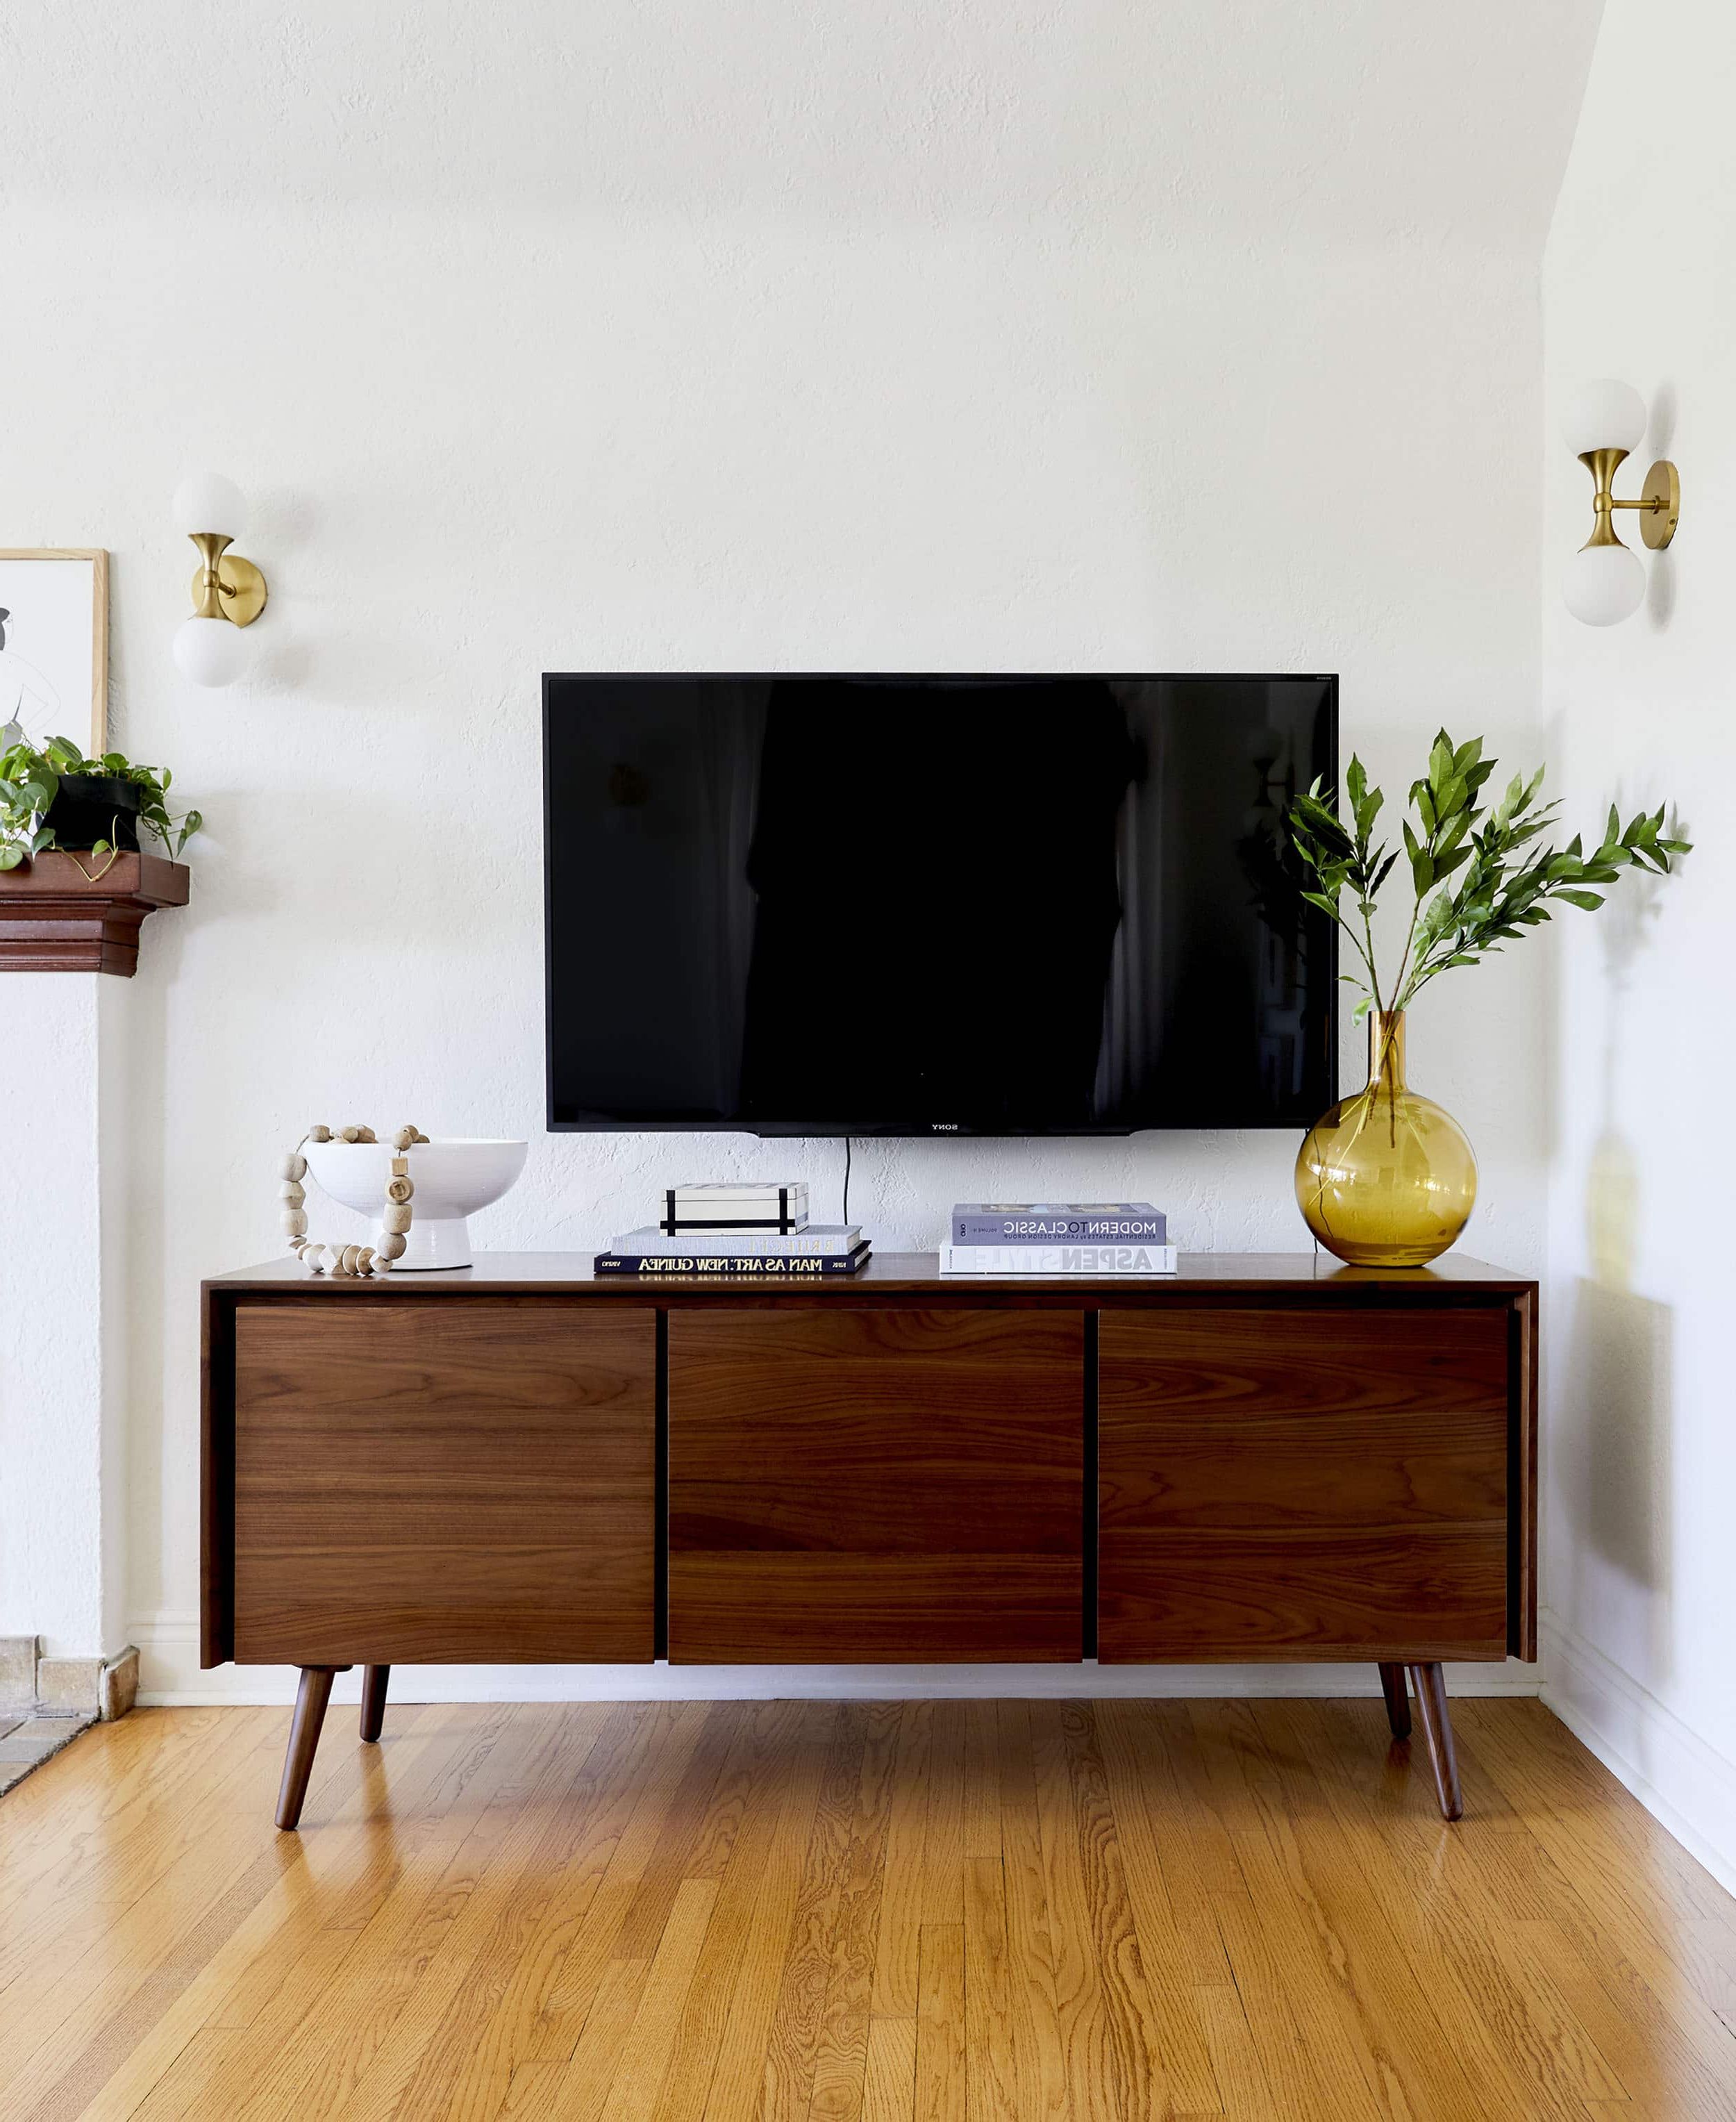 Credenzas For Living Room In Best And Newest 4 Ways To Style That Credenza For "real Life" + Shop Our Favorite Credenzas  – Emily Henderson (View 5 of 10)